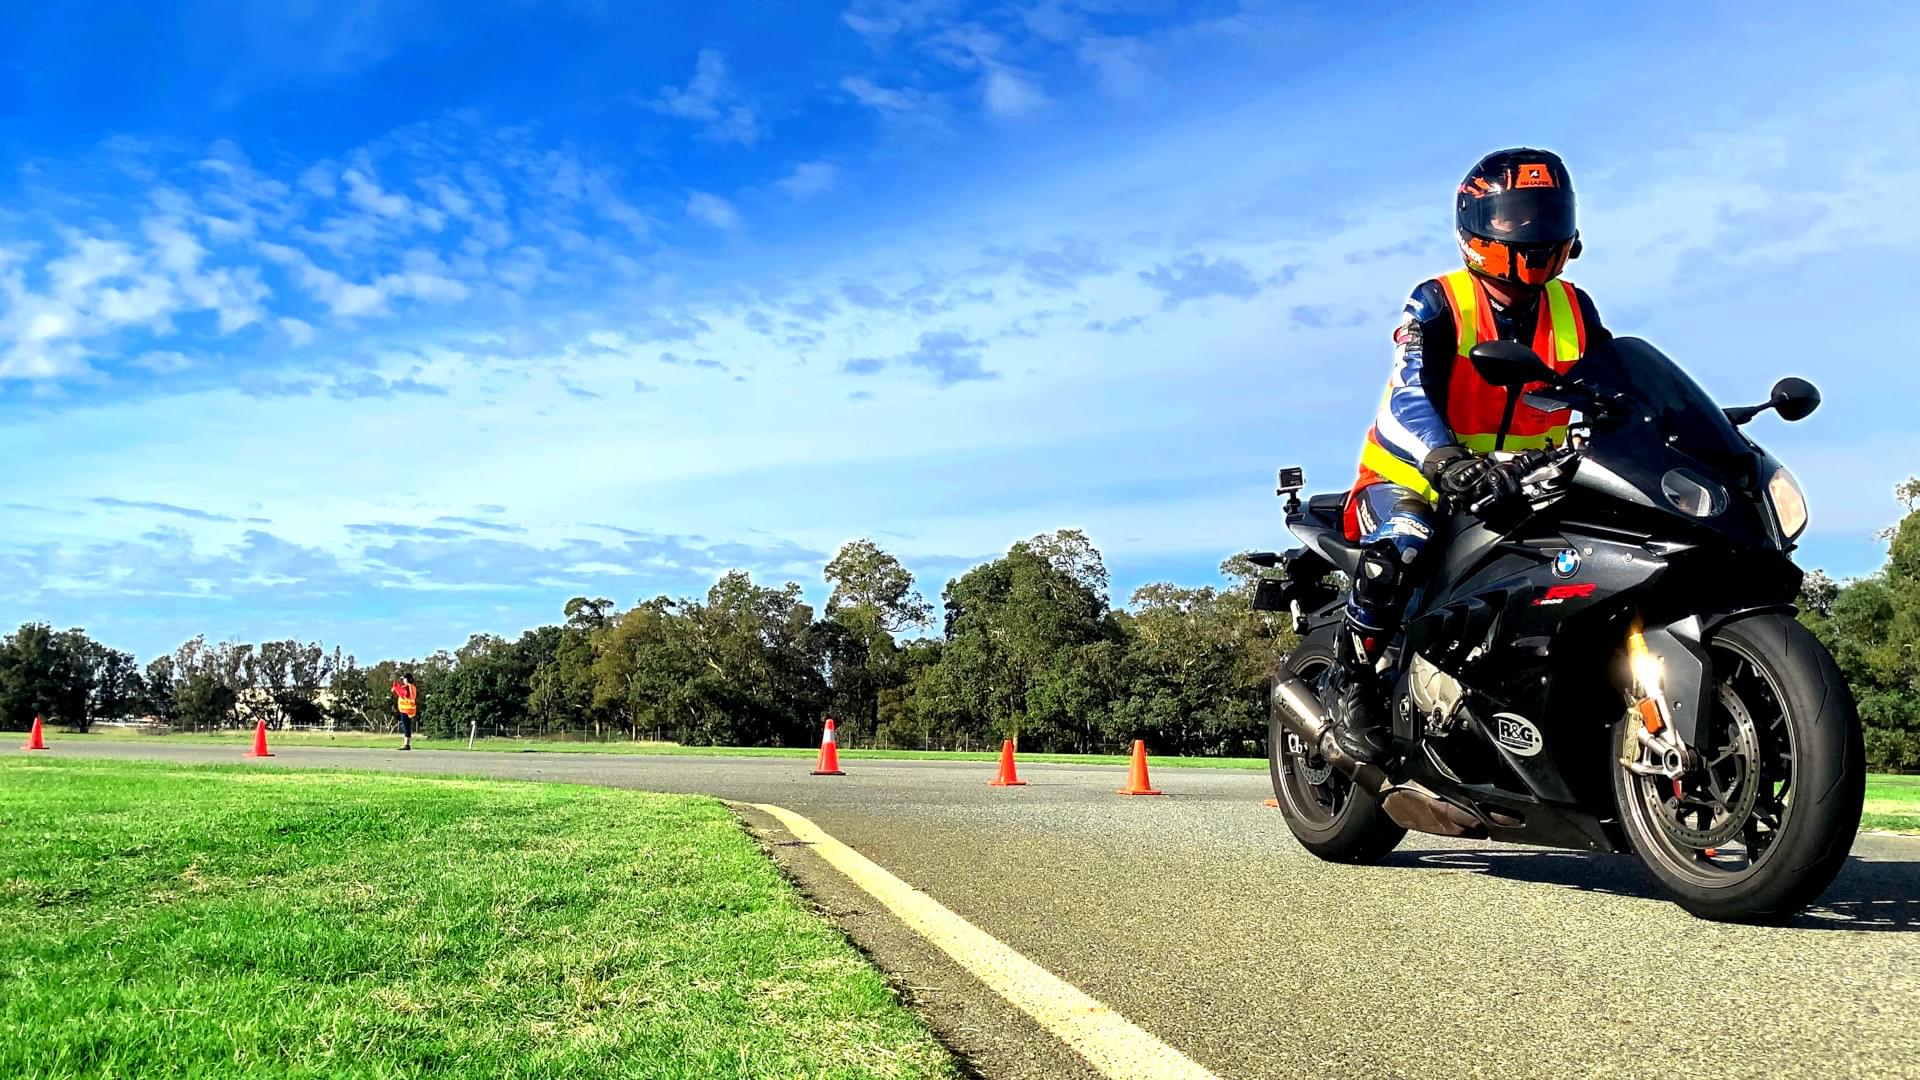 Motorcycle Trainer on BMW S1000RR